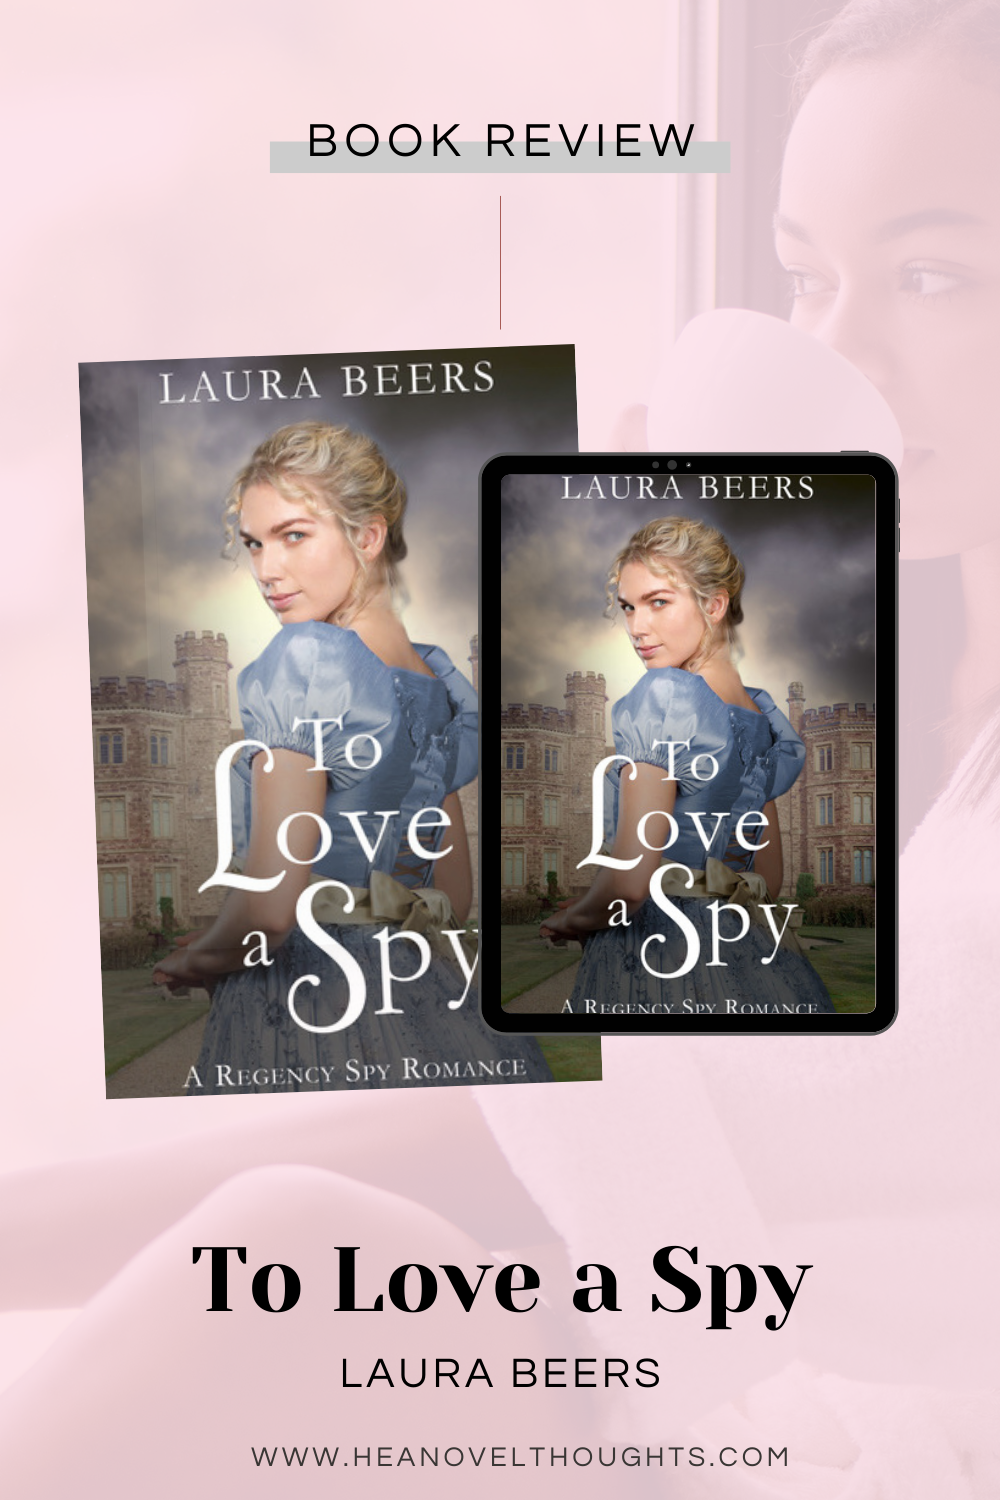 To Love a Spy by Laura Beers